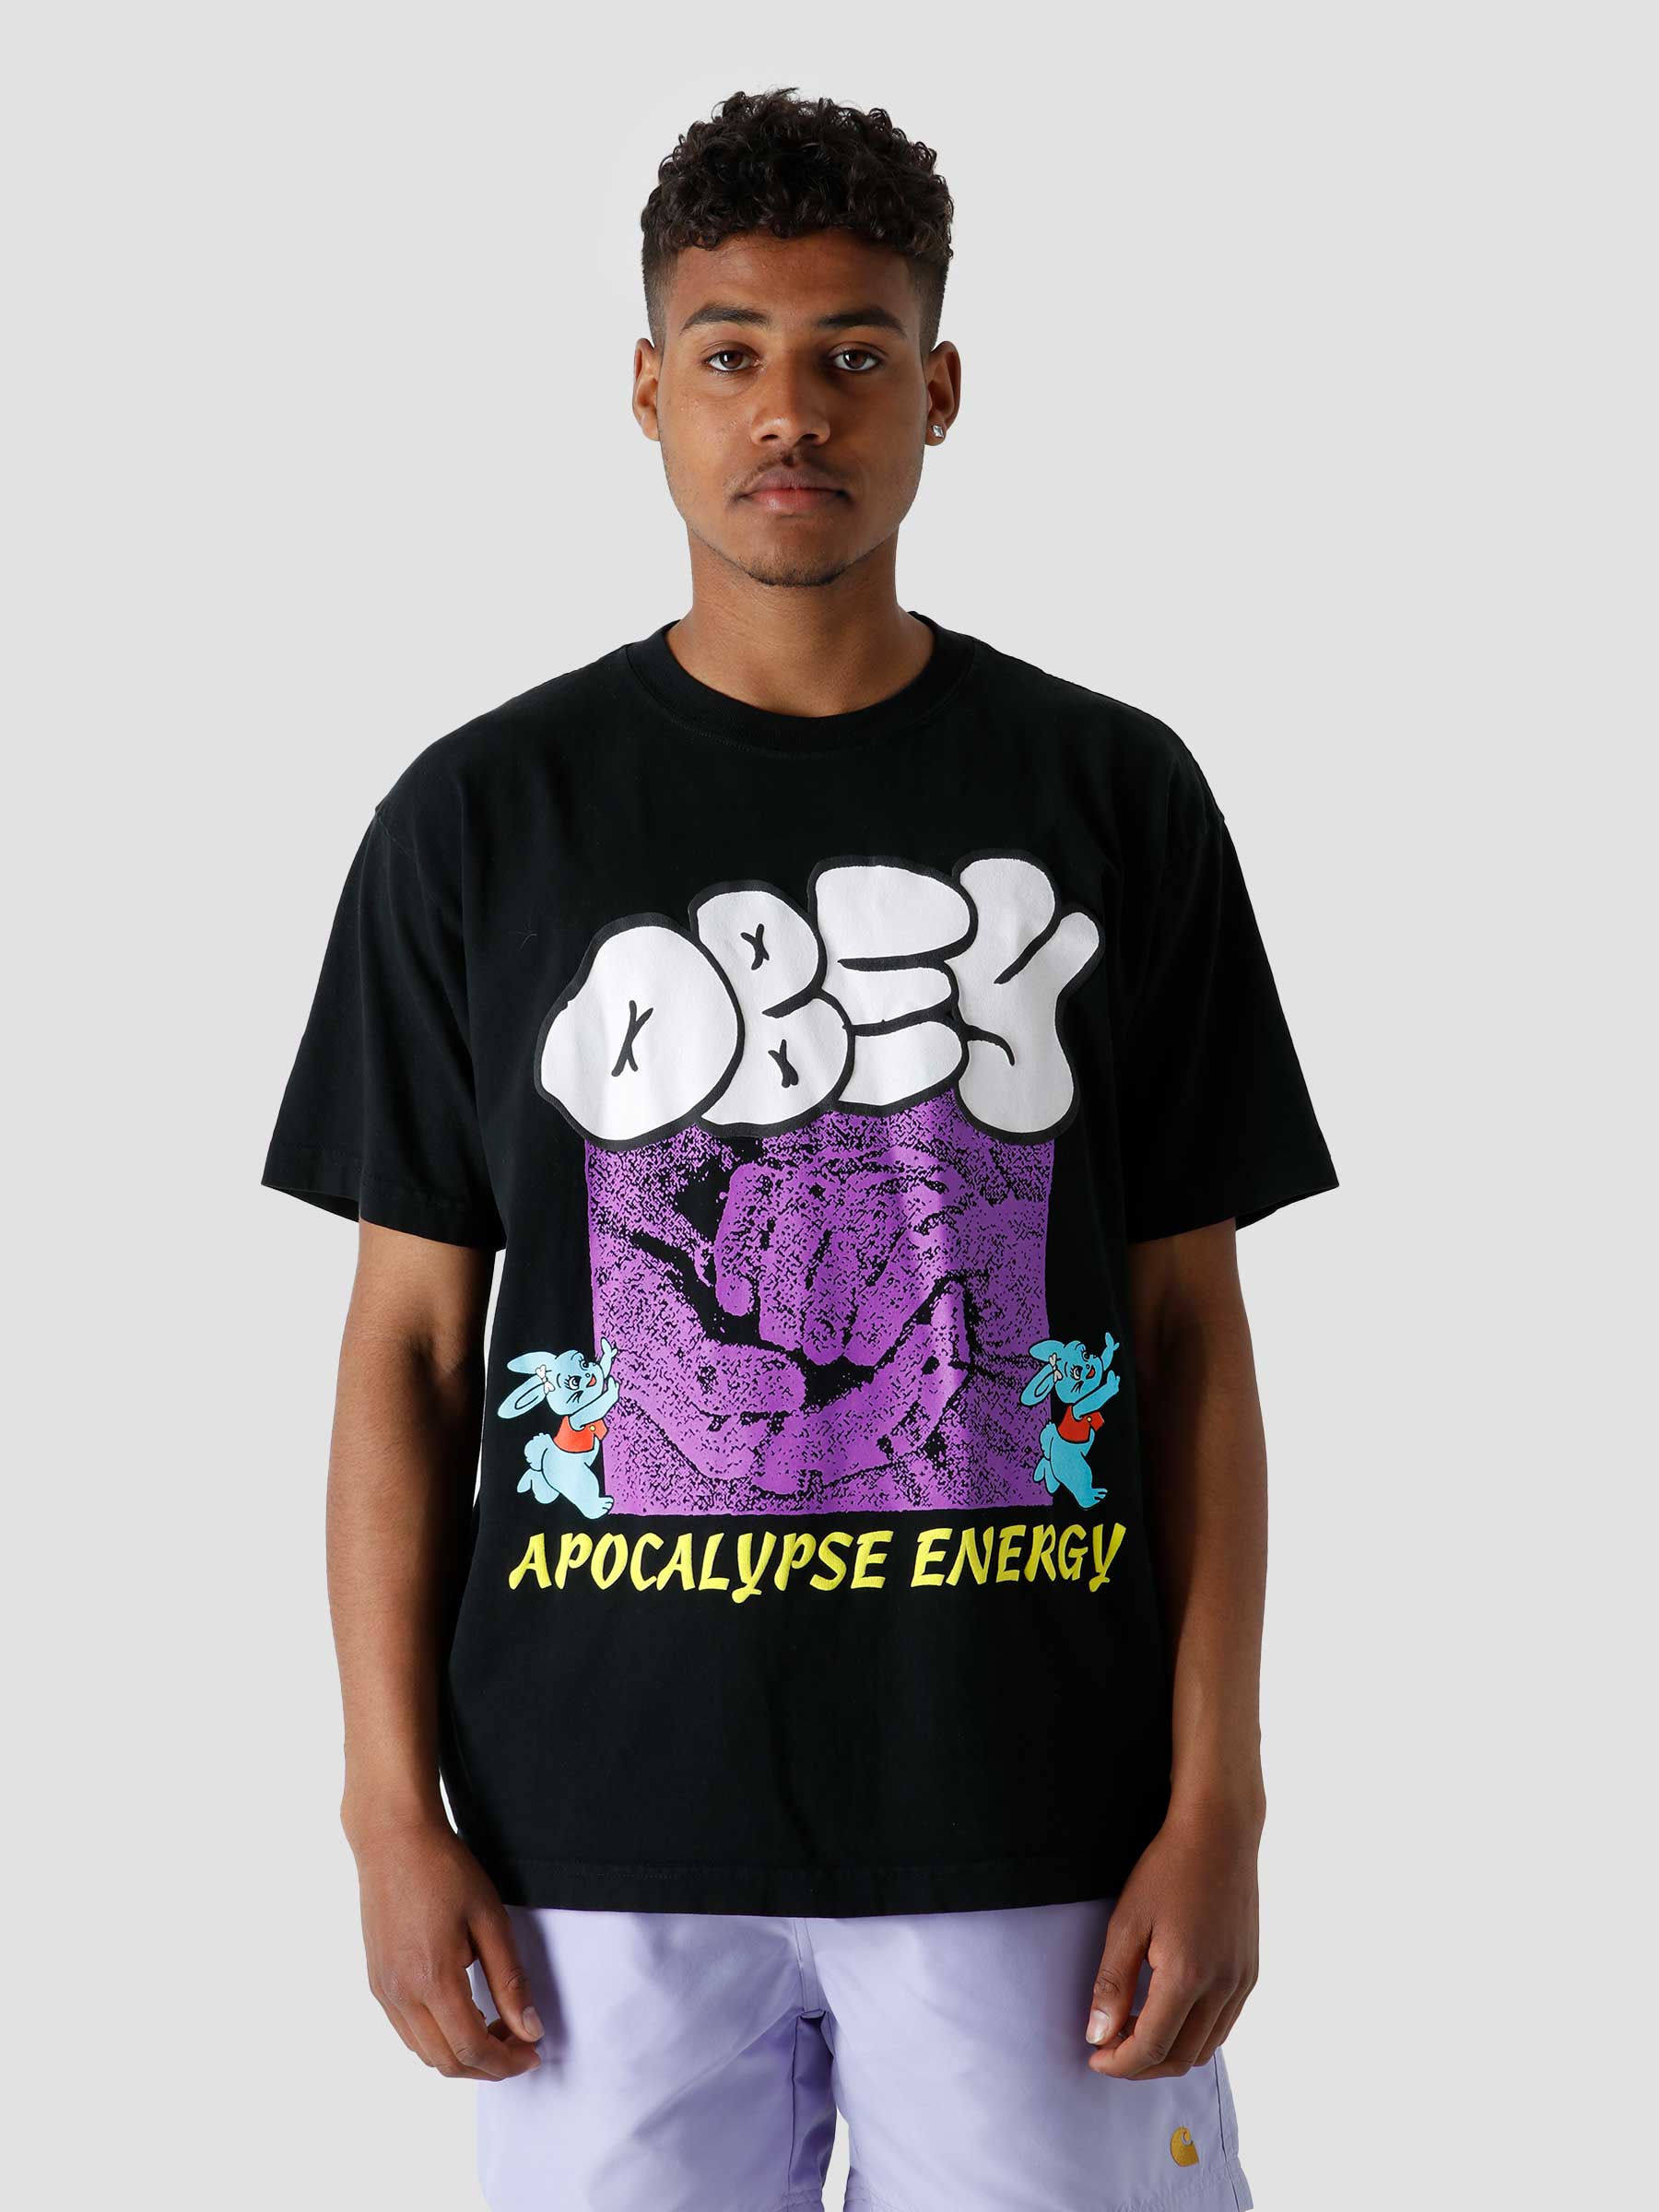 Apocalypse Enegry T-Shirt Pigment Faded Black 163632934